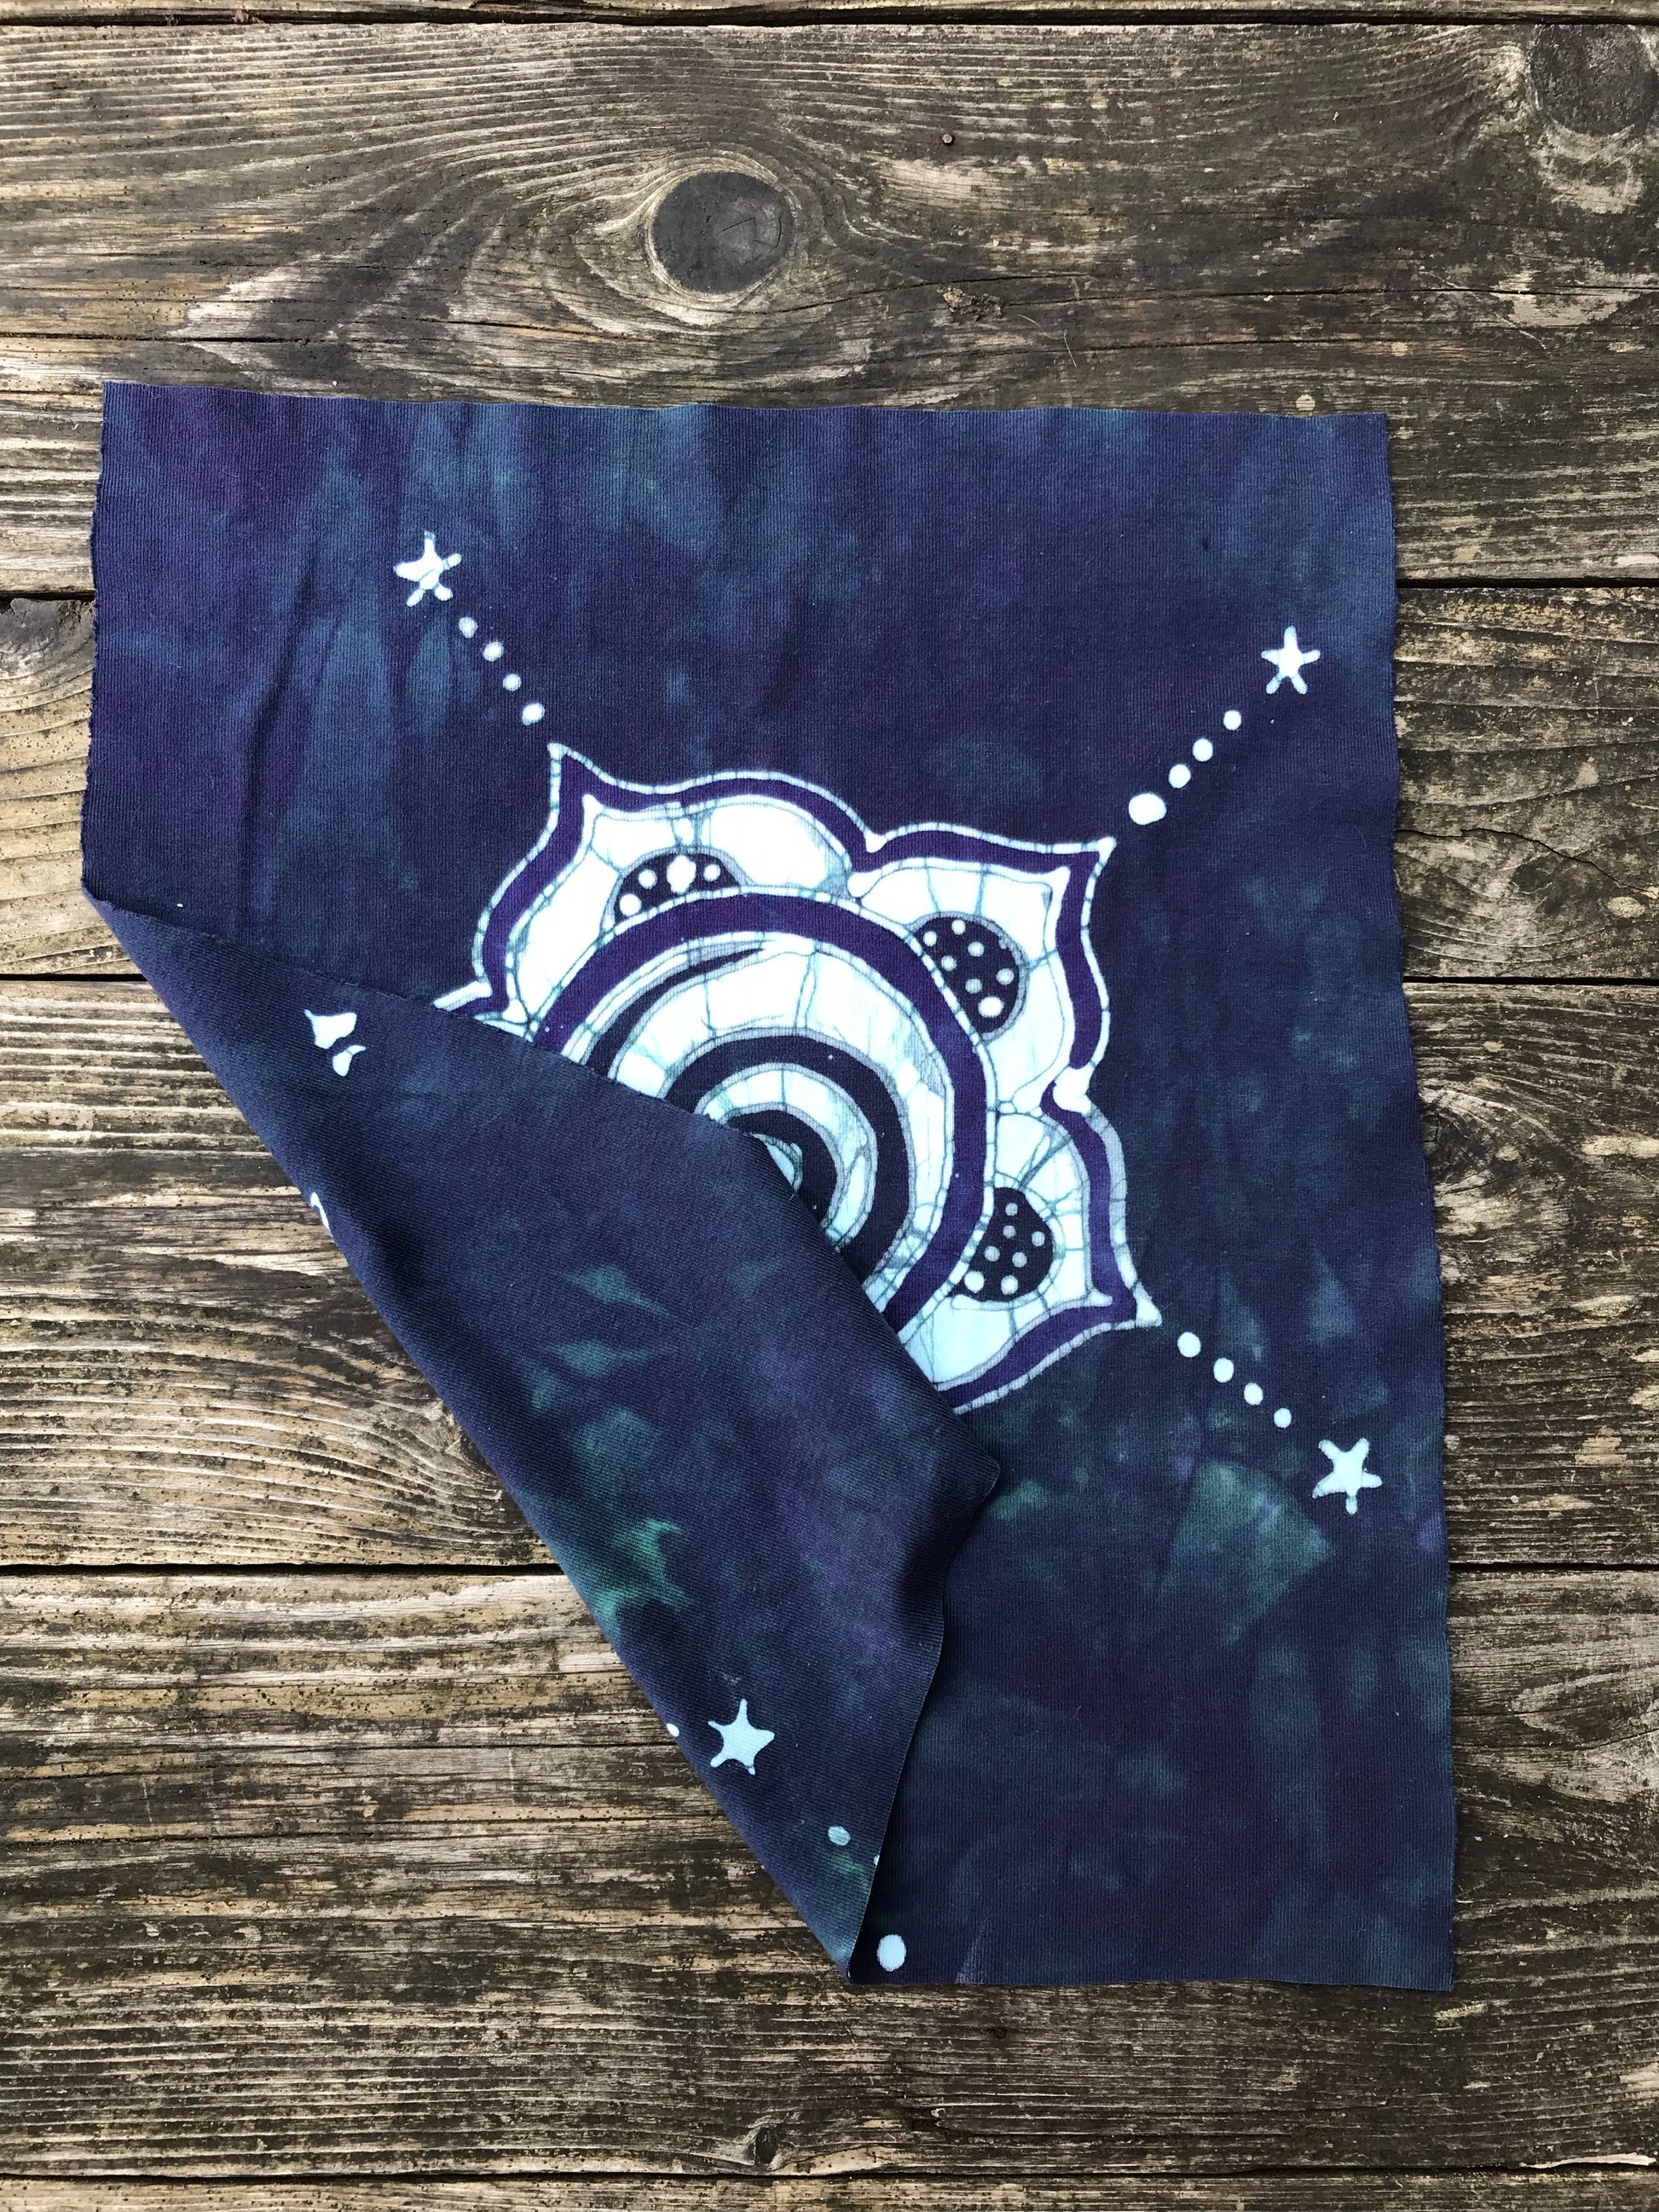 Hand Painted Batik Fabric Square - Swirling Star Flower in Teal and Purple Batikwalla by Victoria 